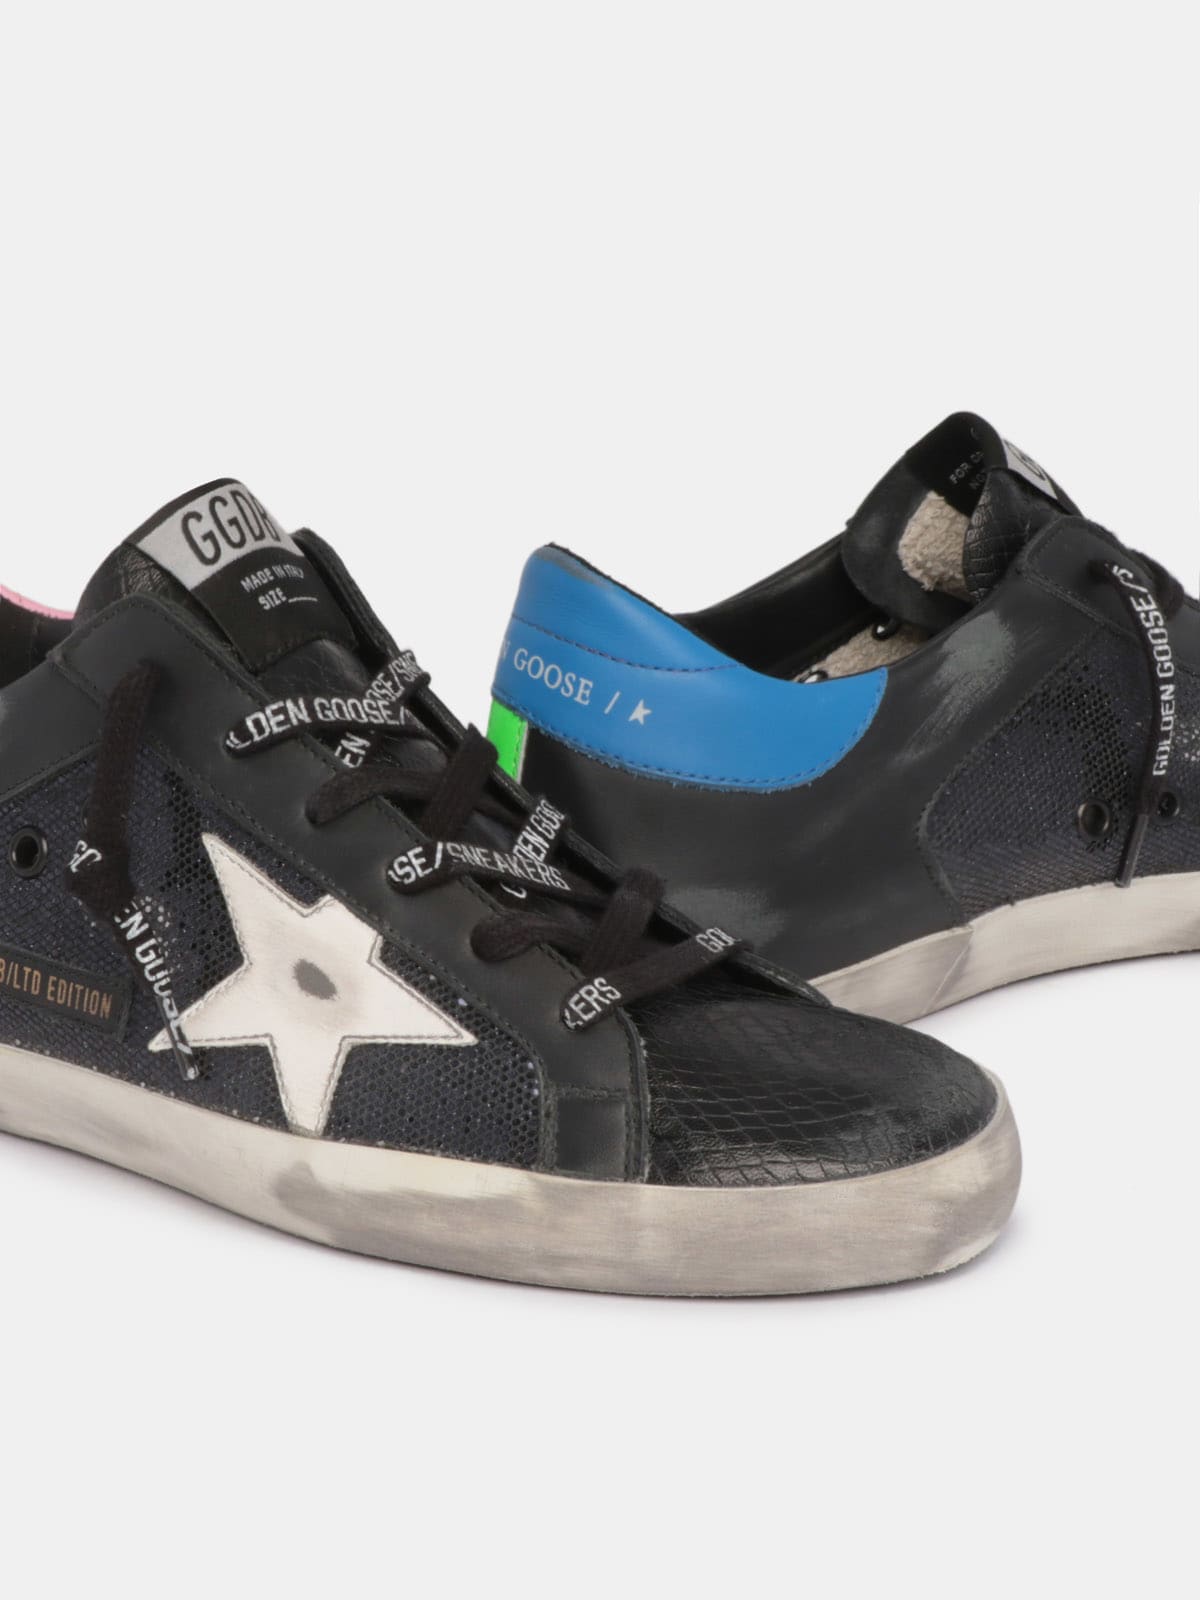 LTD Super-Star sneakers in snake-print leather and glitter with colored  inserts | Golden Goose